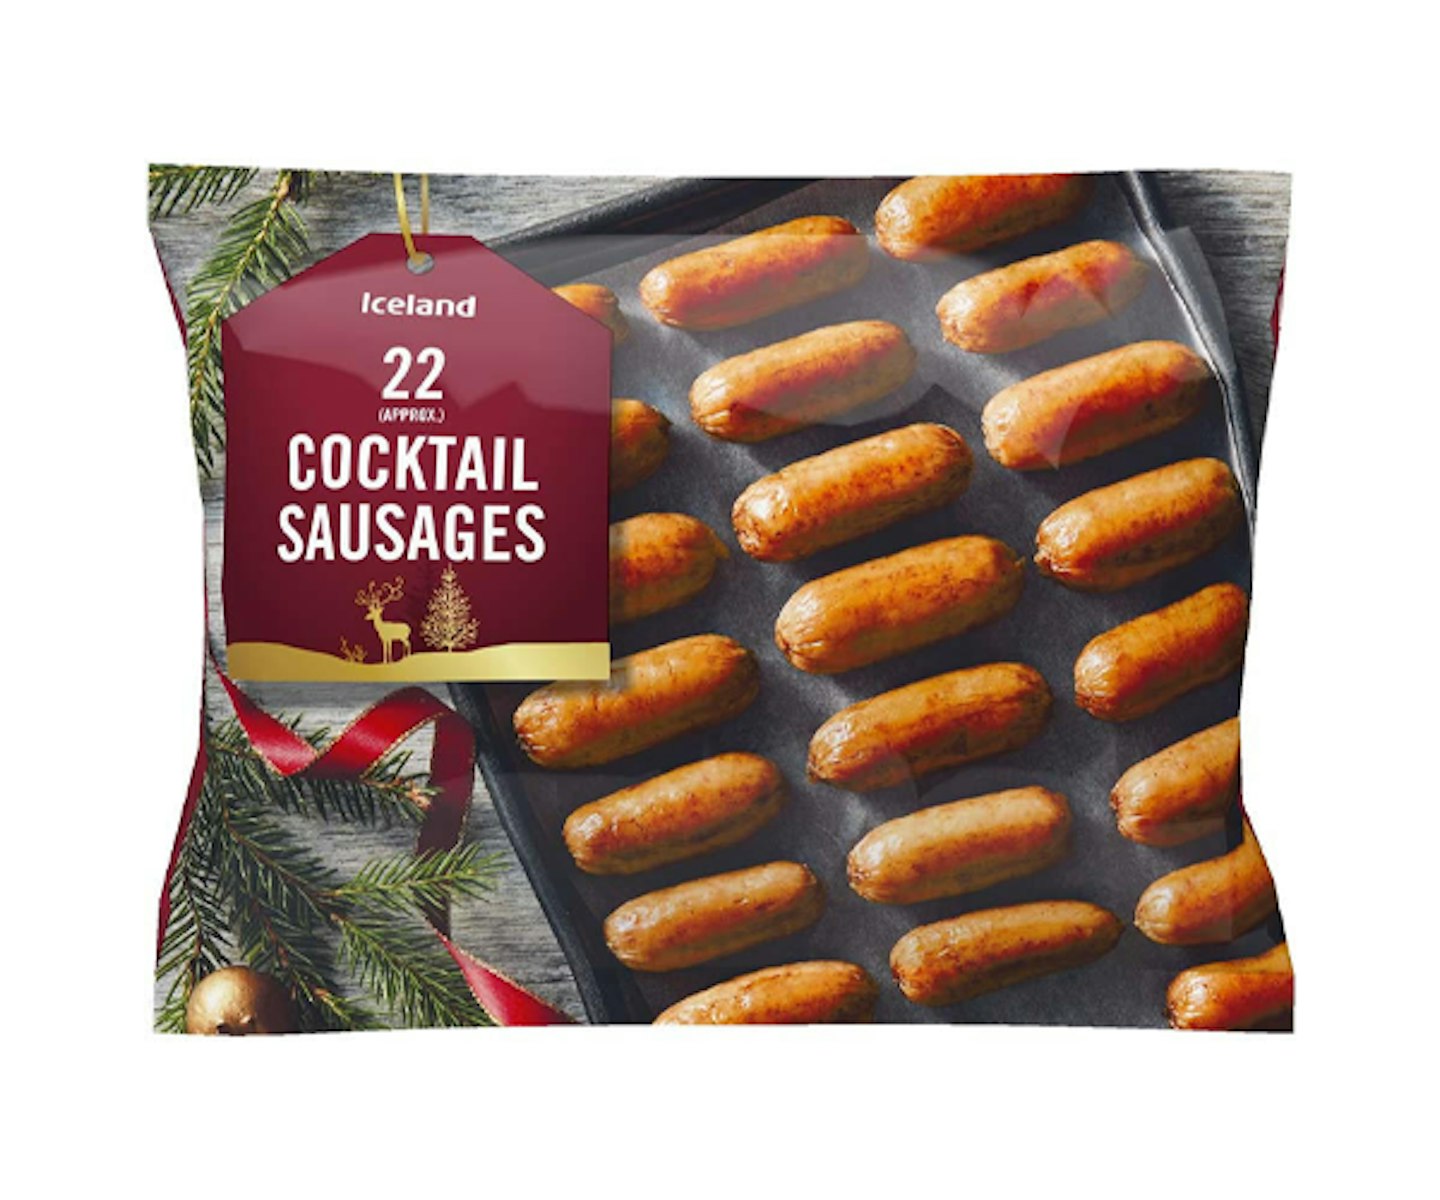 Iceland 22 (approx.) Cocktail Sausages 308g